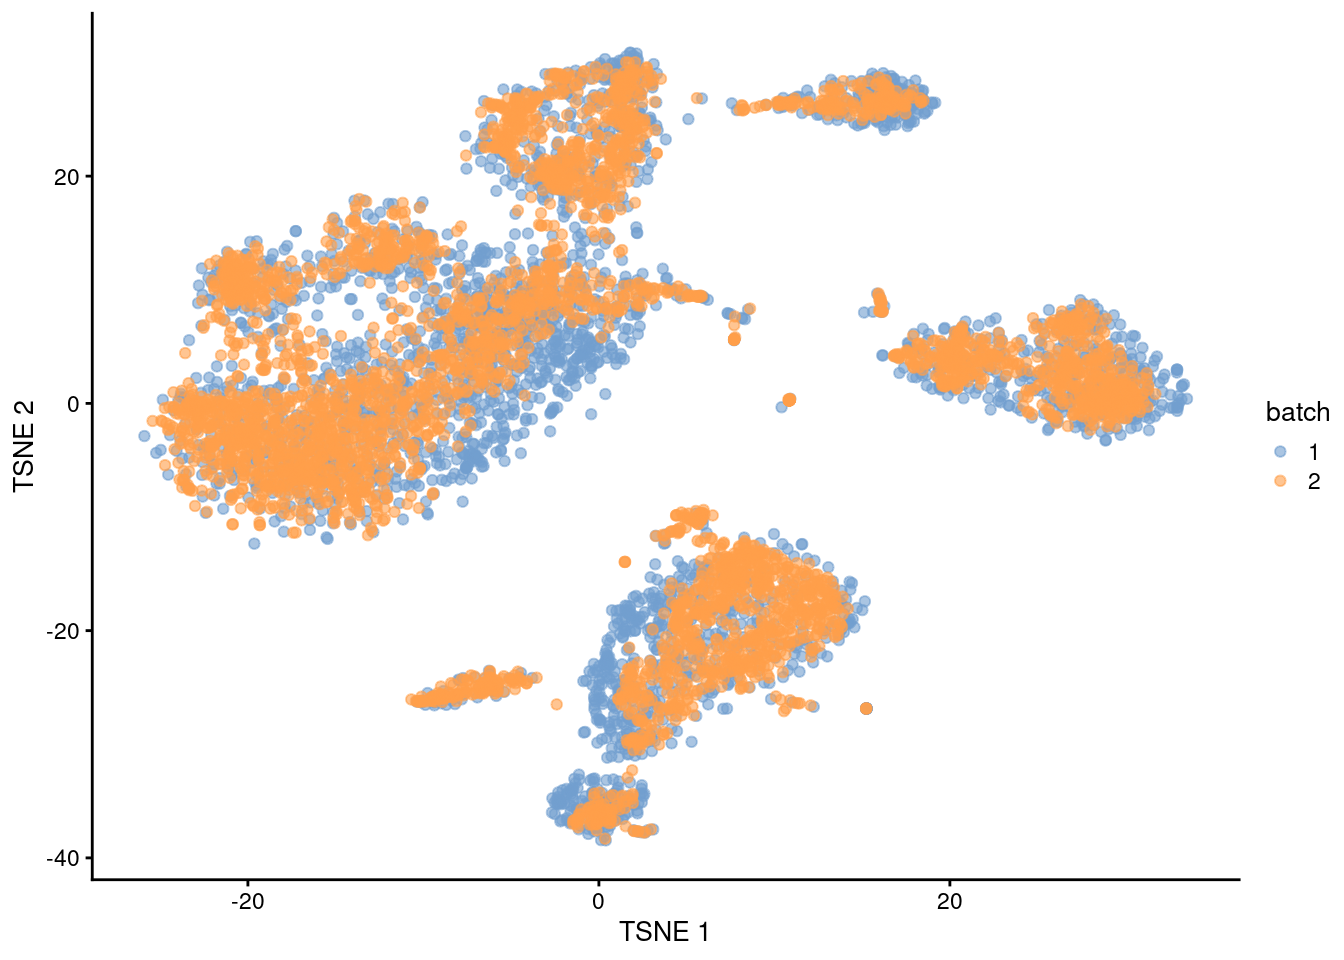 $t$-SNE plot of the PBMC datasets after MNN correction. Each point is a cell that is colored according to its batch of origin.